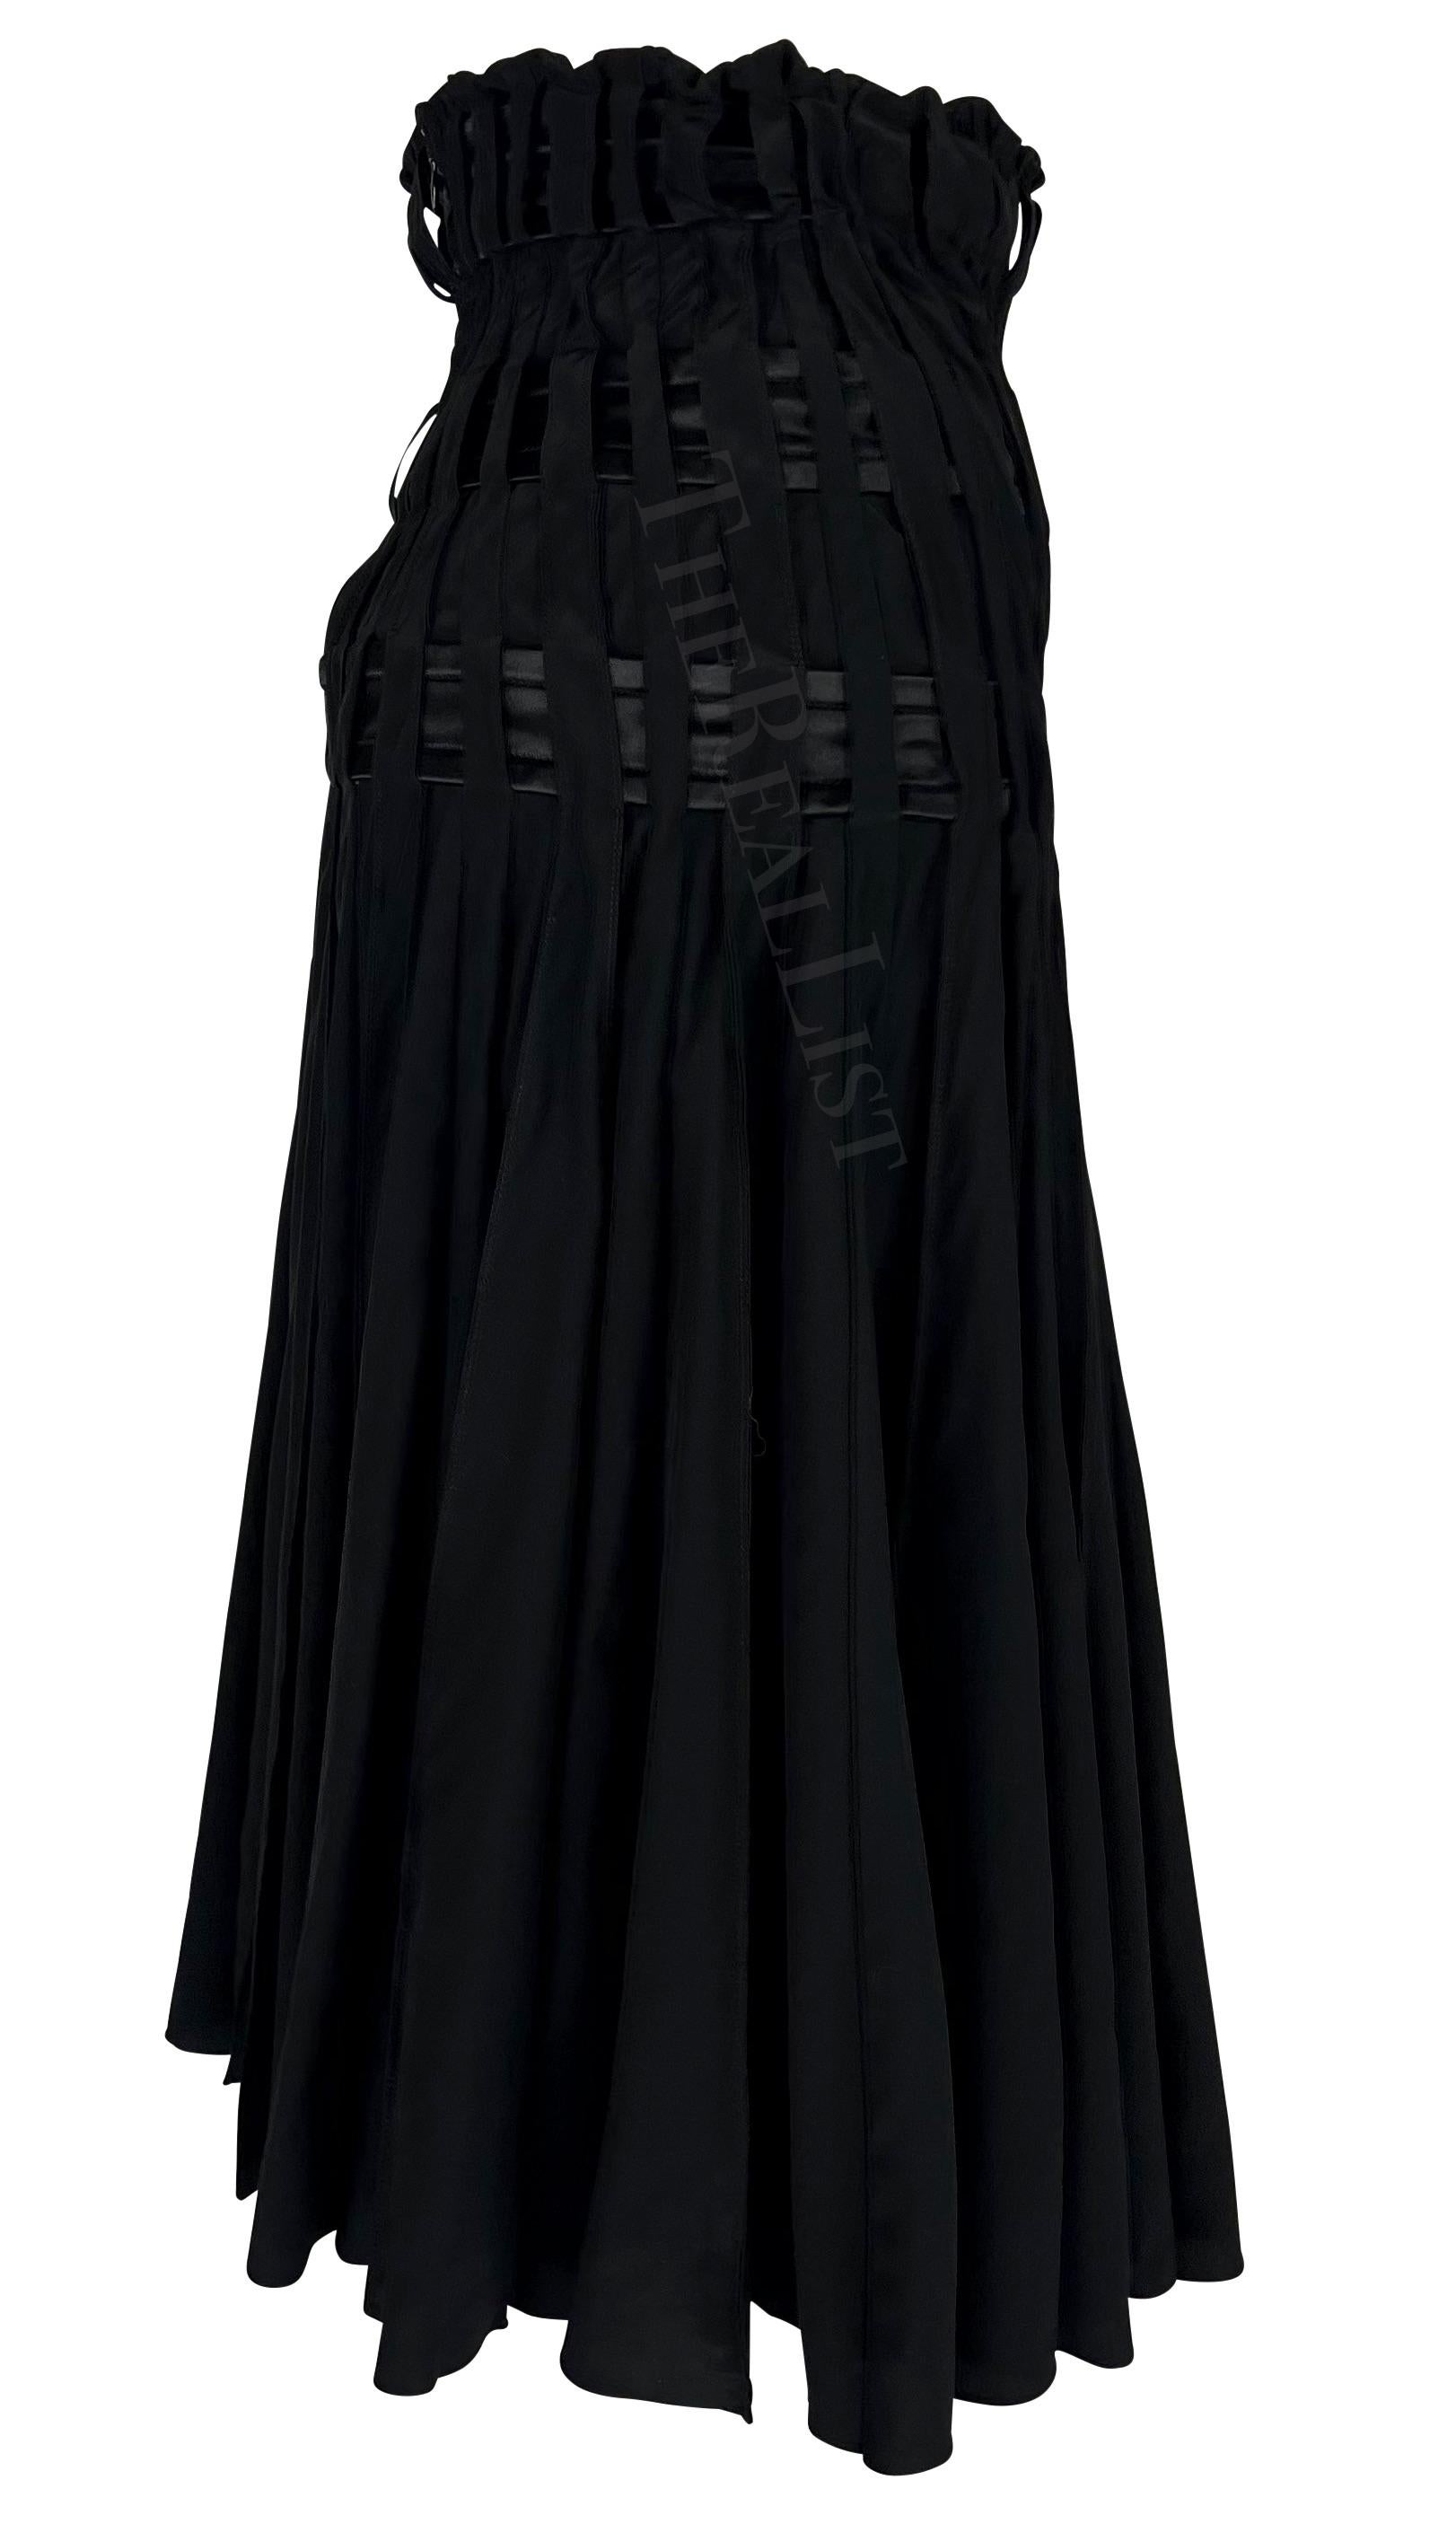 F/W 2001 Yves Saint Laurent by Tom Ford Pleated Black Satin Flare Skirt For Sale 1